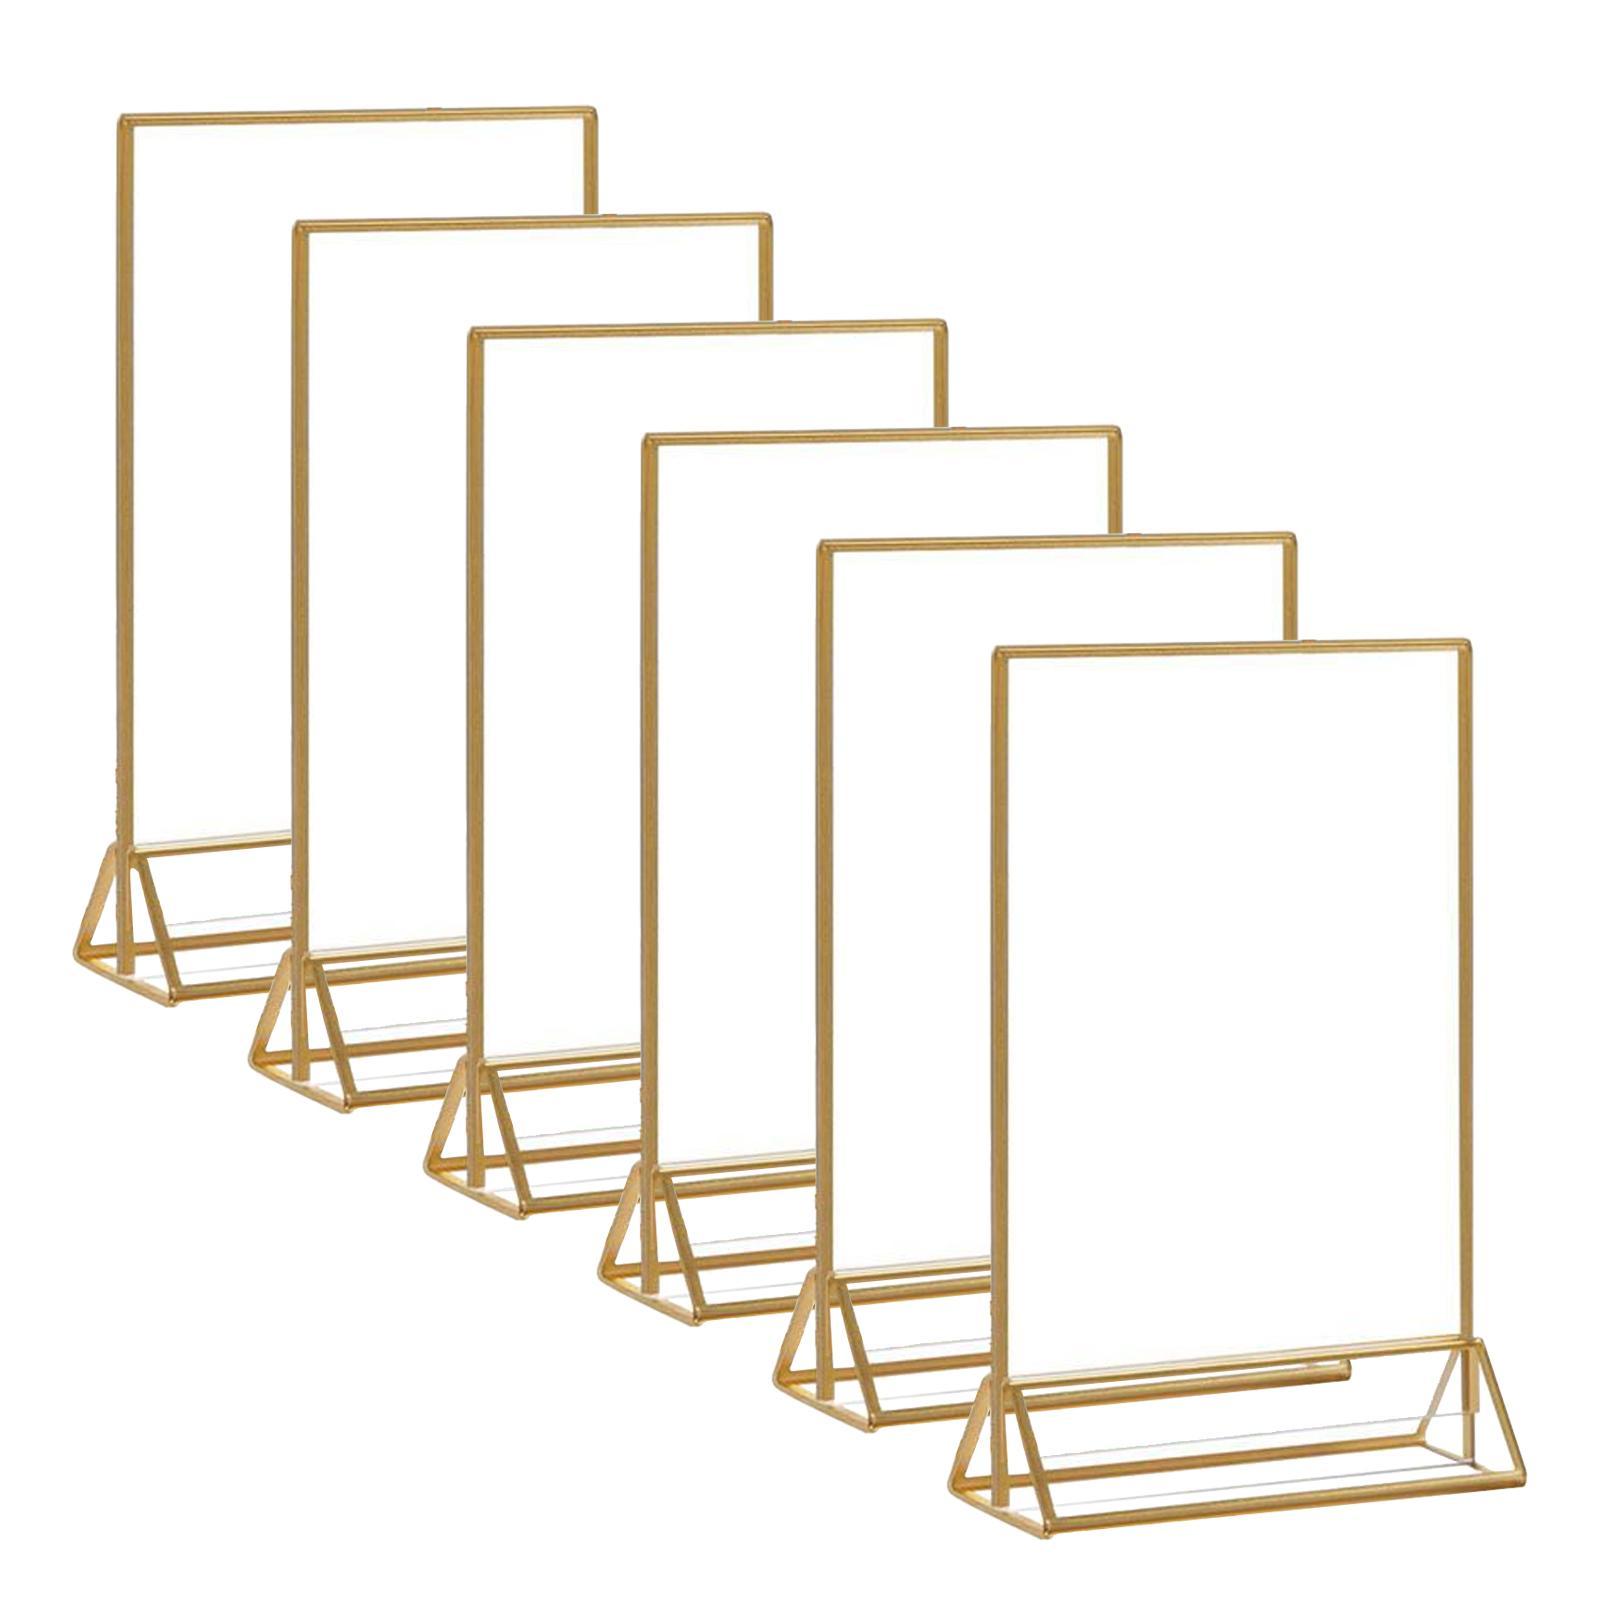 6Pcs Acrylic Sign Holder Table Menu Display Stand Wedding Store Stand Document Meetings Poster Sign Holder Flyer Display